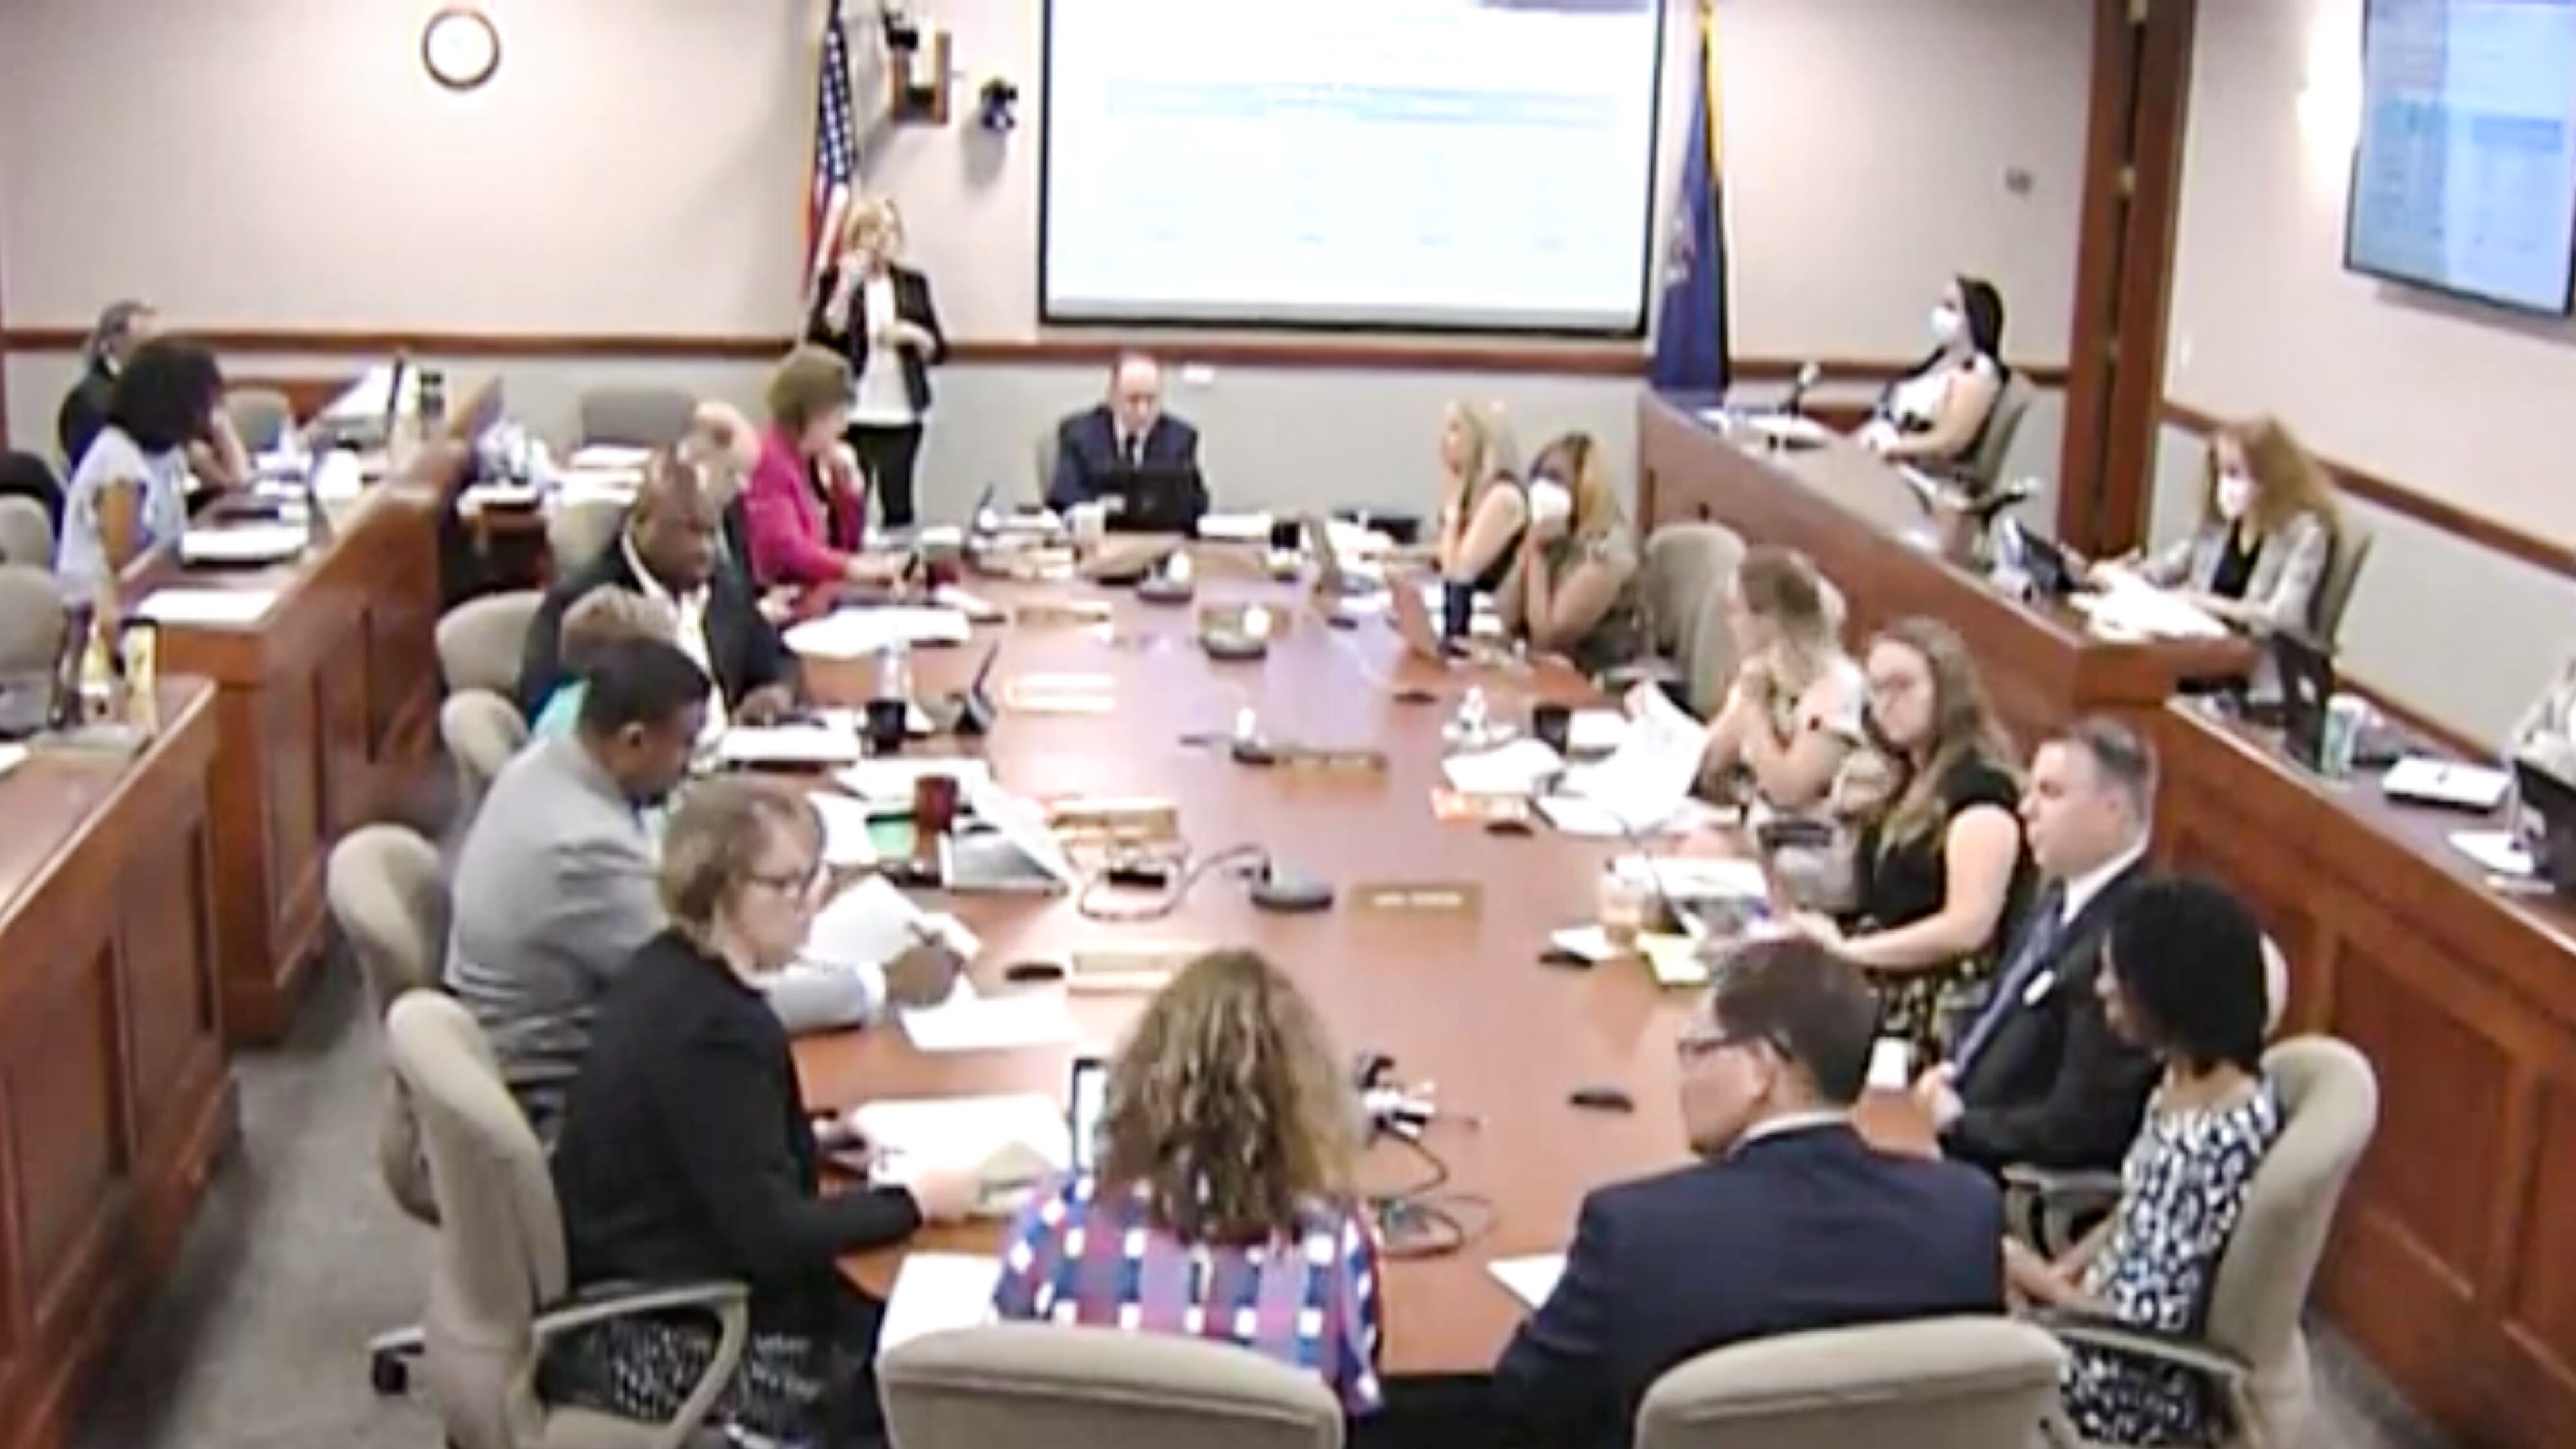 Michigan Board of Education members are joined by several other school officials seated around an oblong table in a windowless conference room in Lansing.